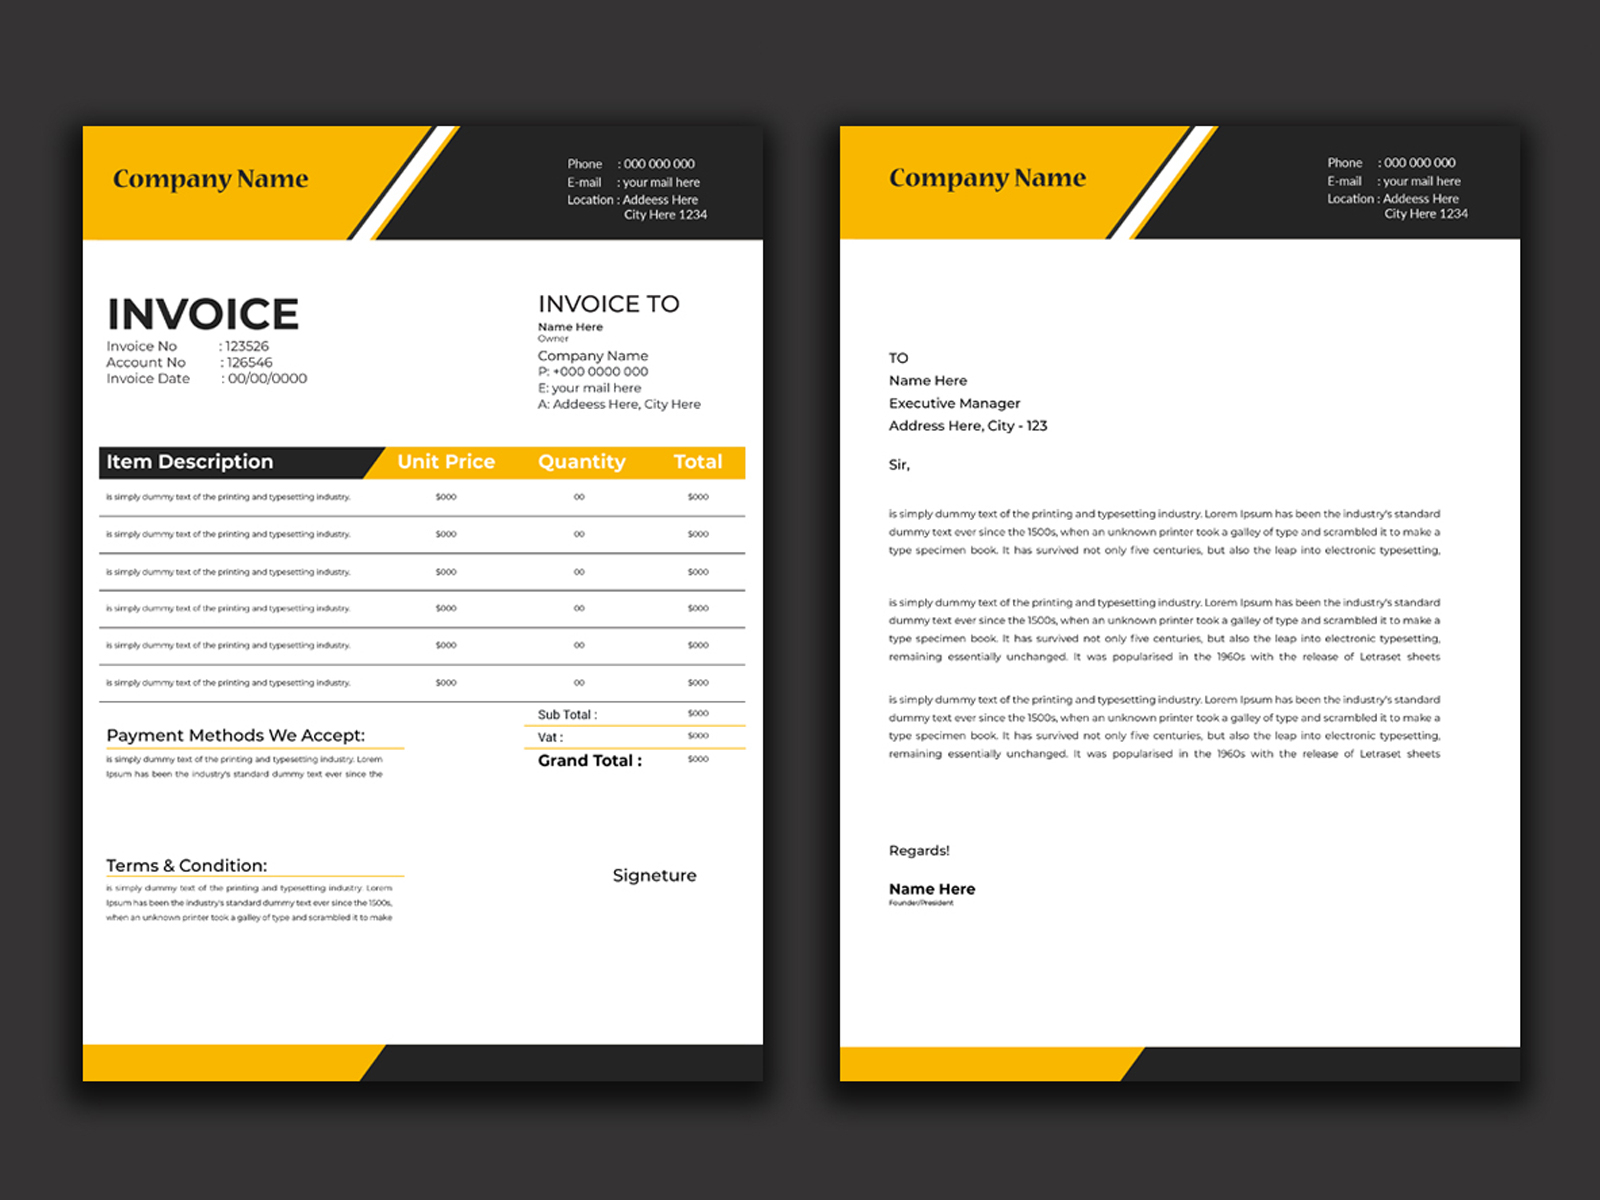 Invoice and Letterhead Template by Rasel #39 s Design on Dribbble